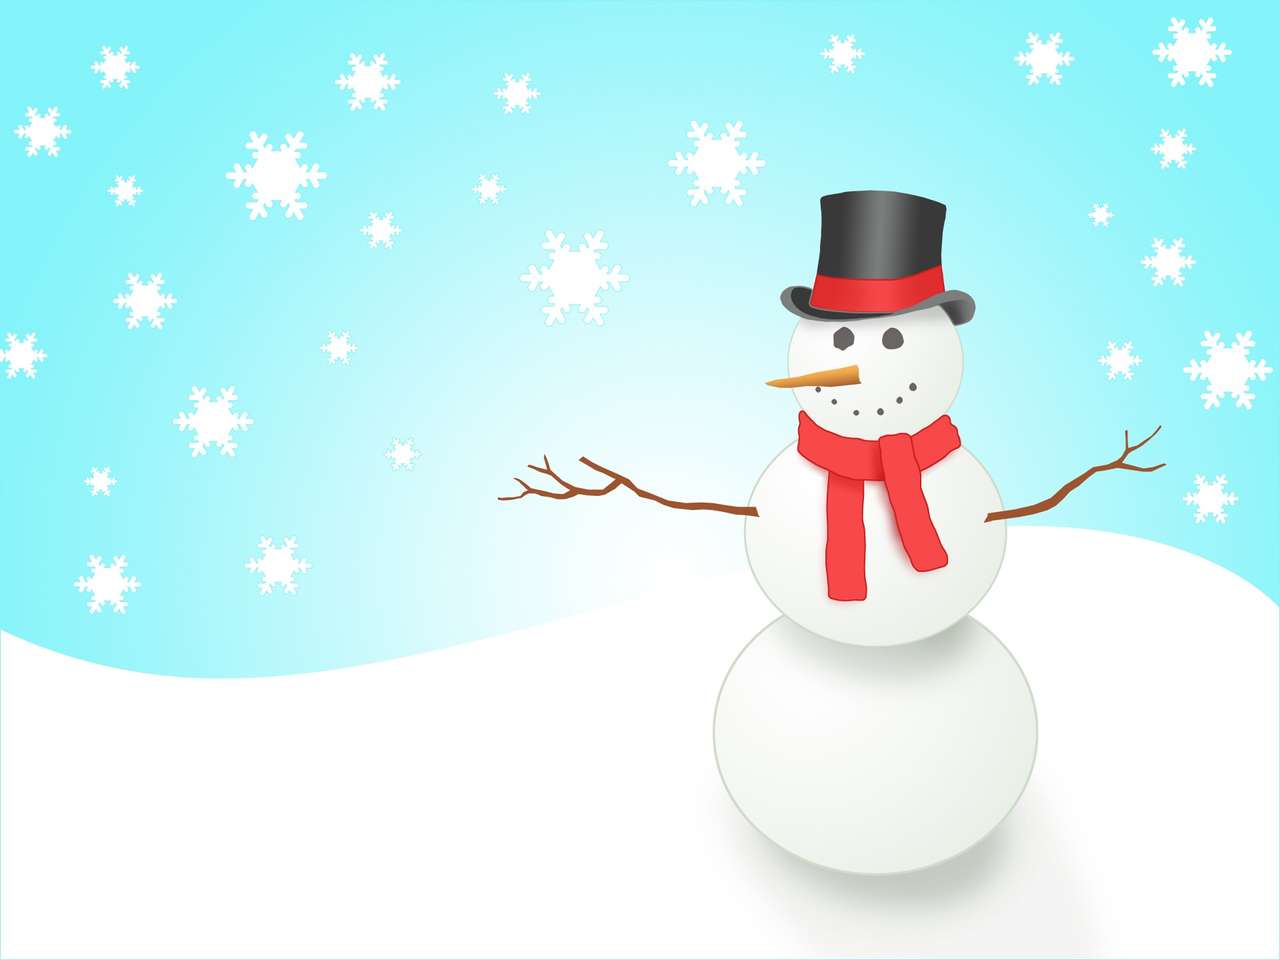 Snowman and Snowflakes online puzzle